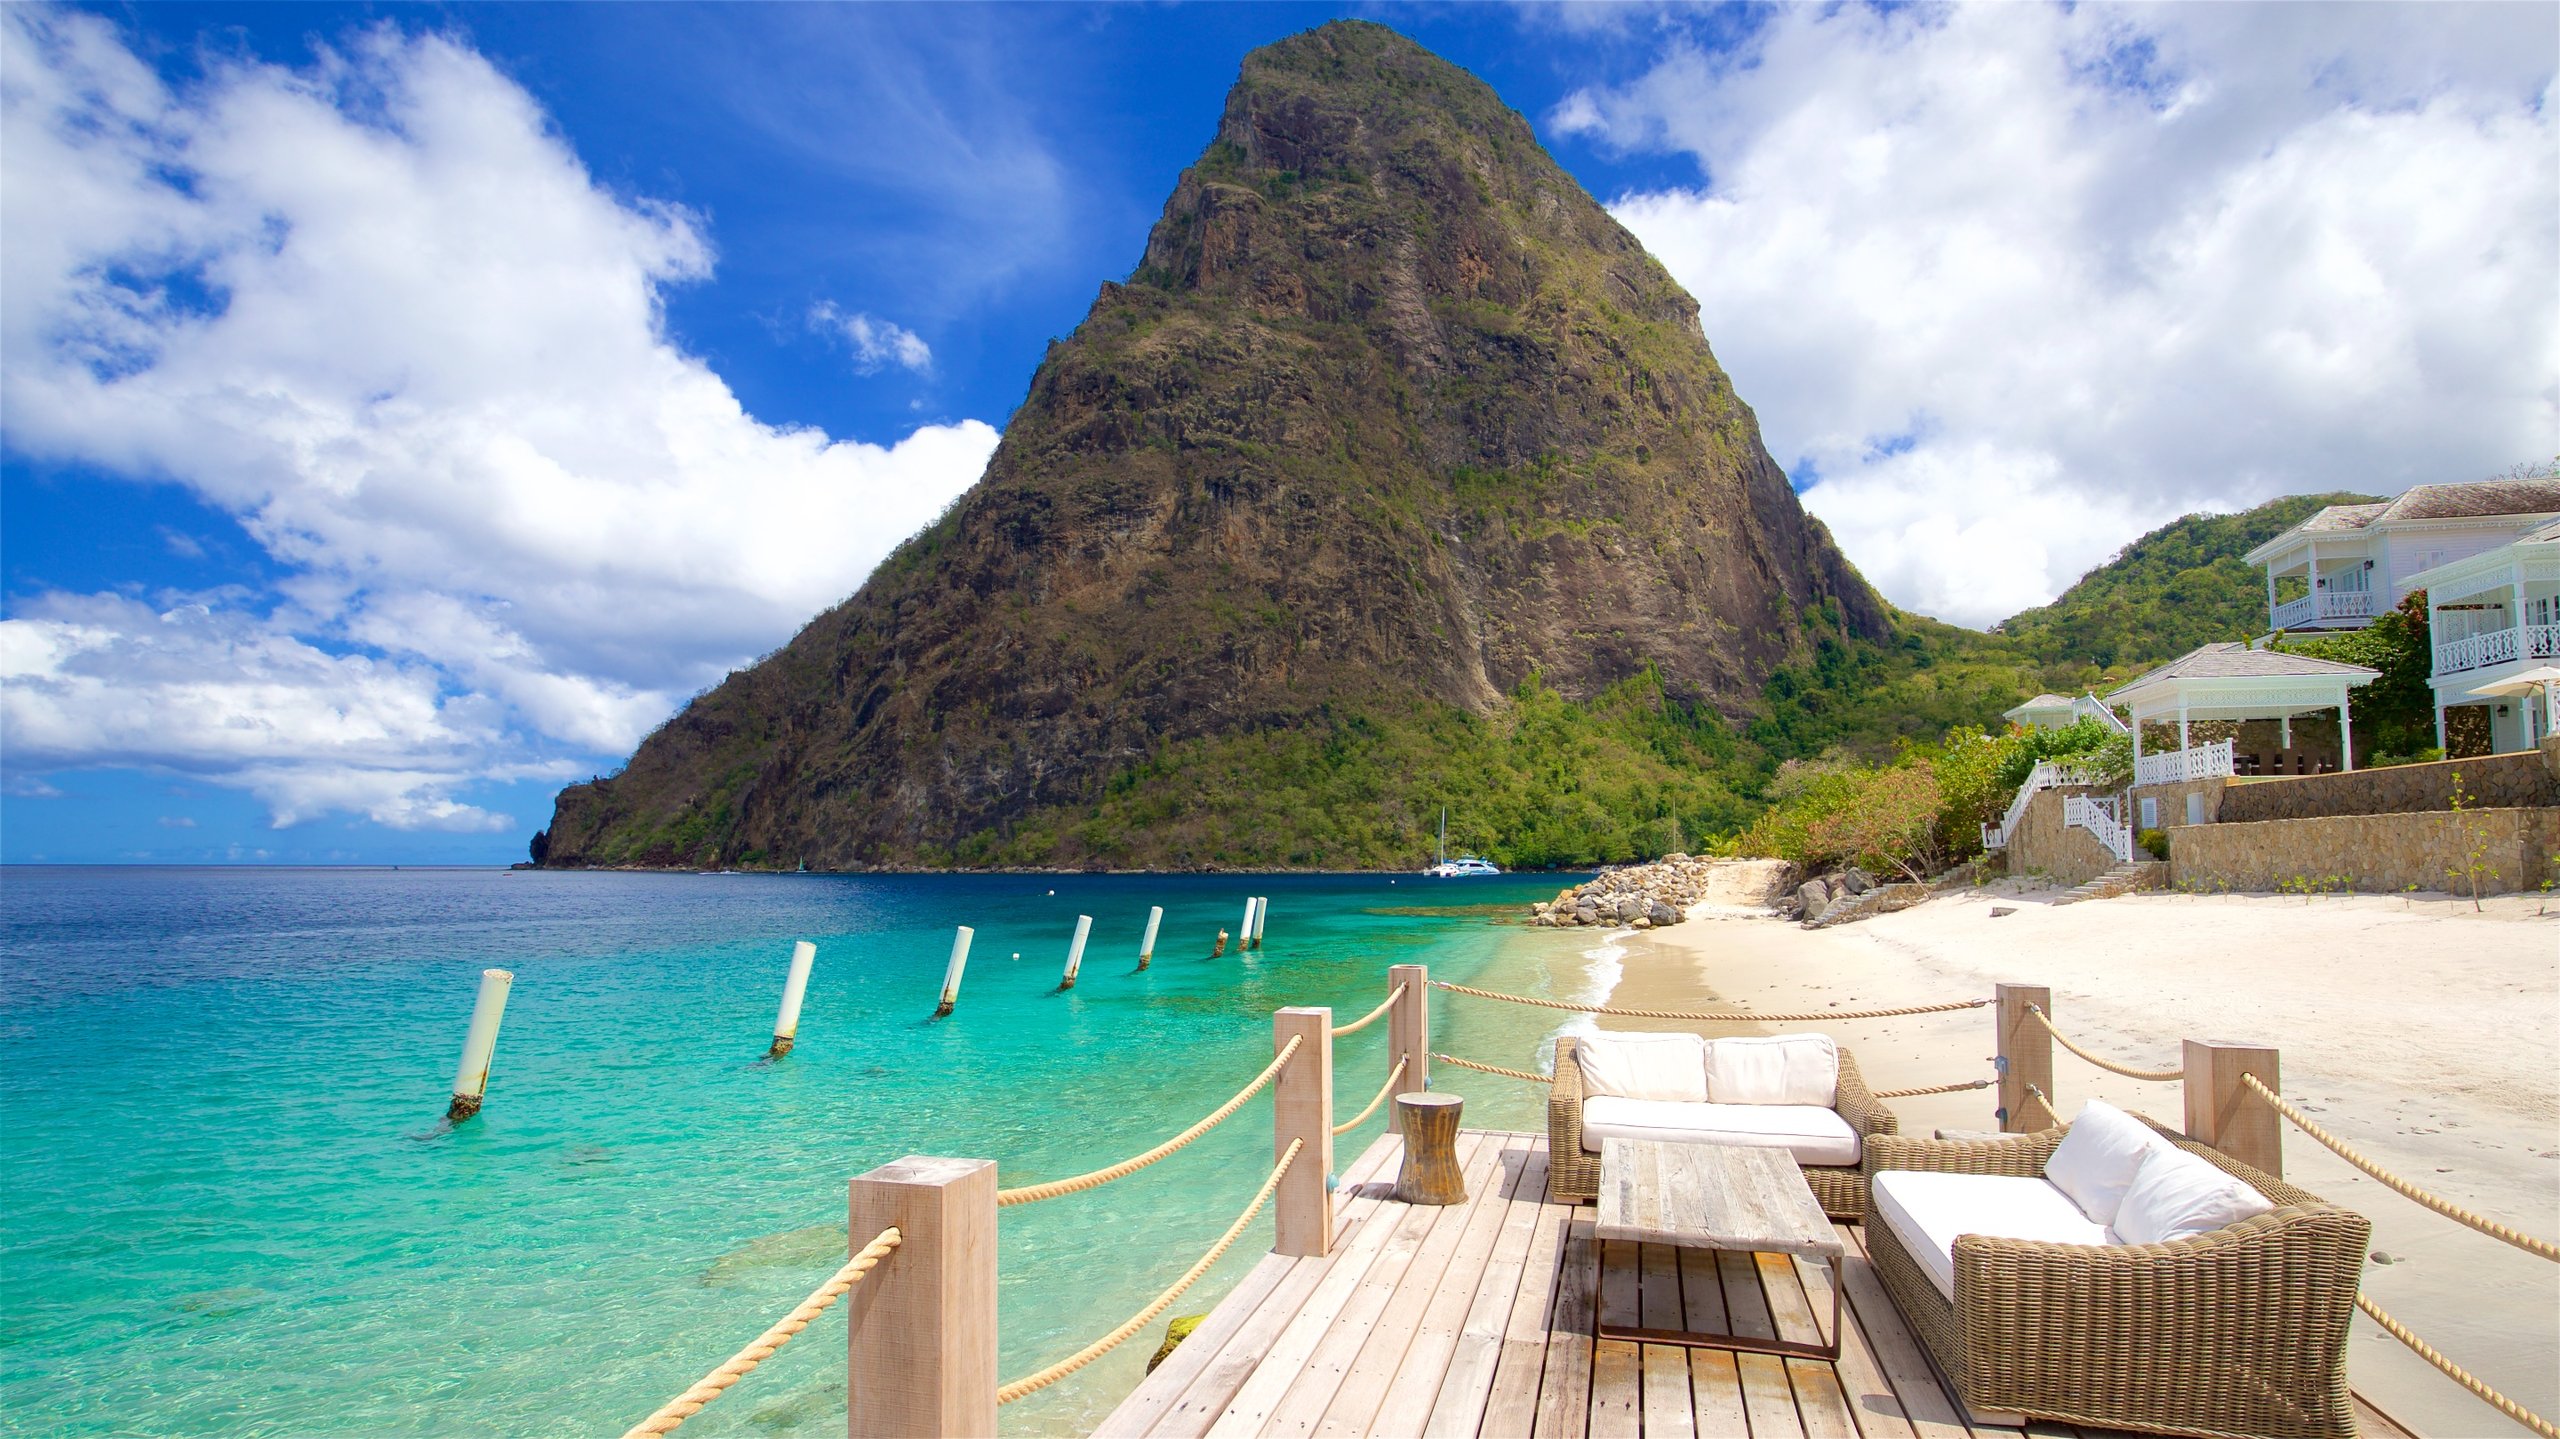 How to Find the Best Cheap Deals to St Lucia for Your Next Vacation